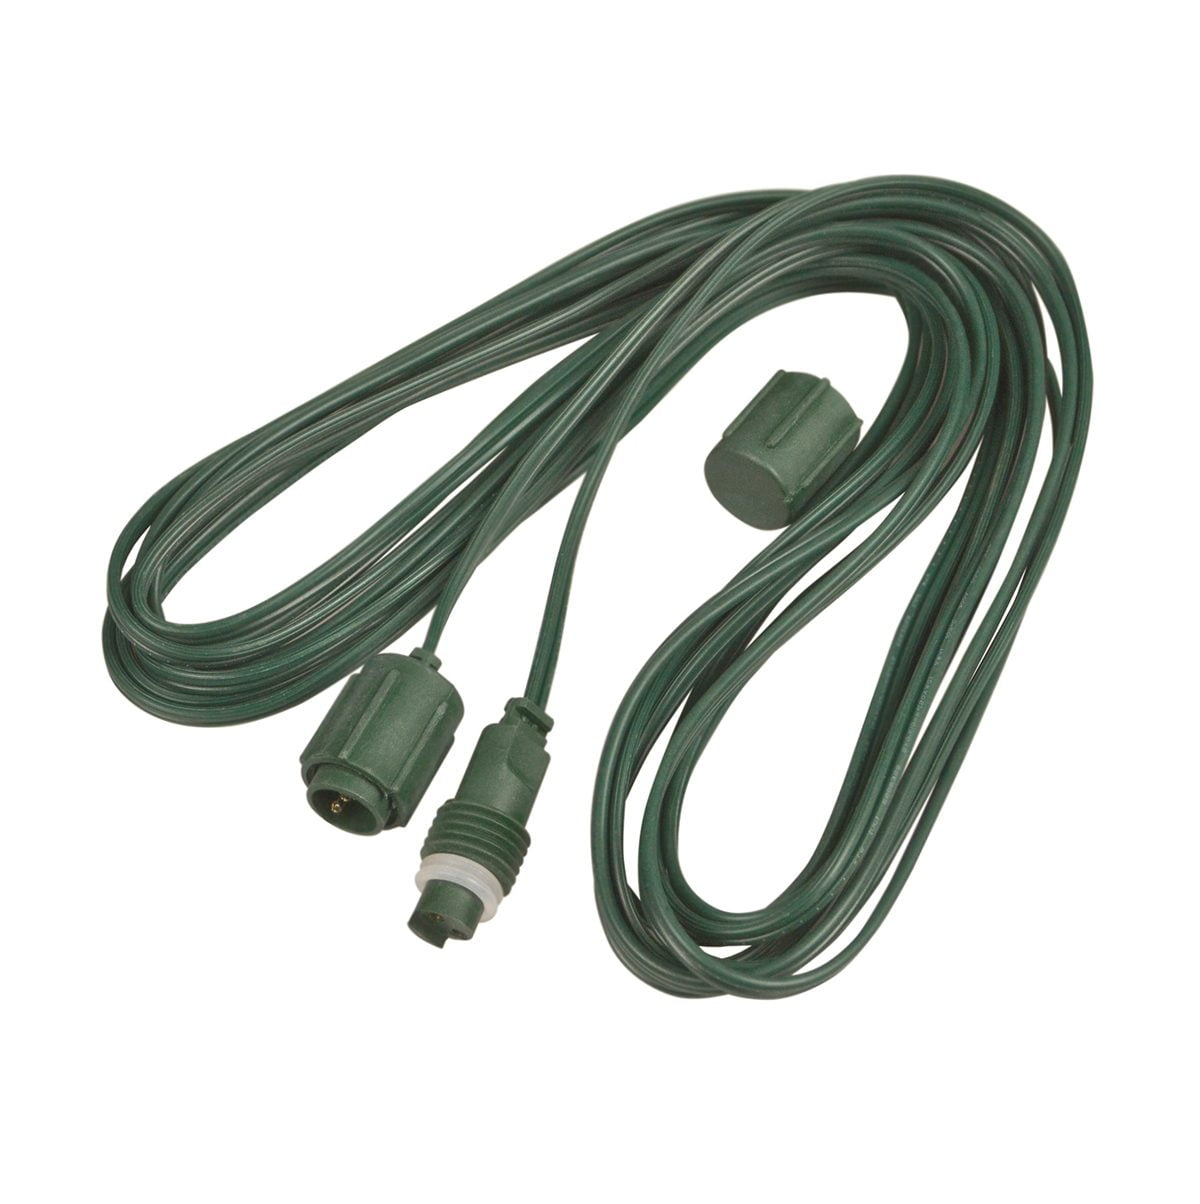 25′ Coaxial Extension Cord – Green